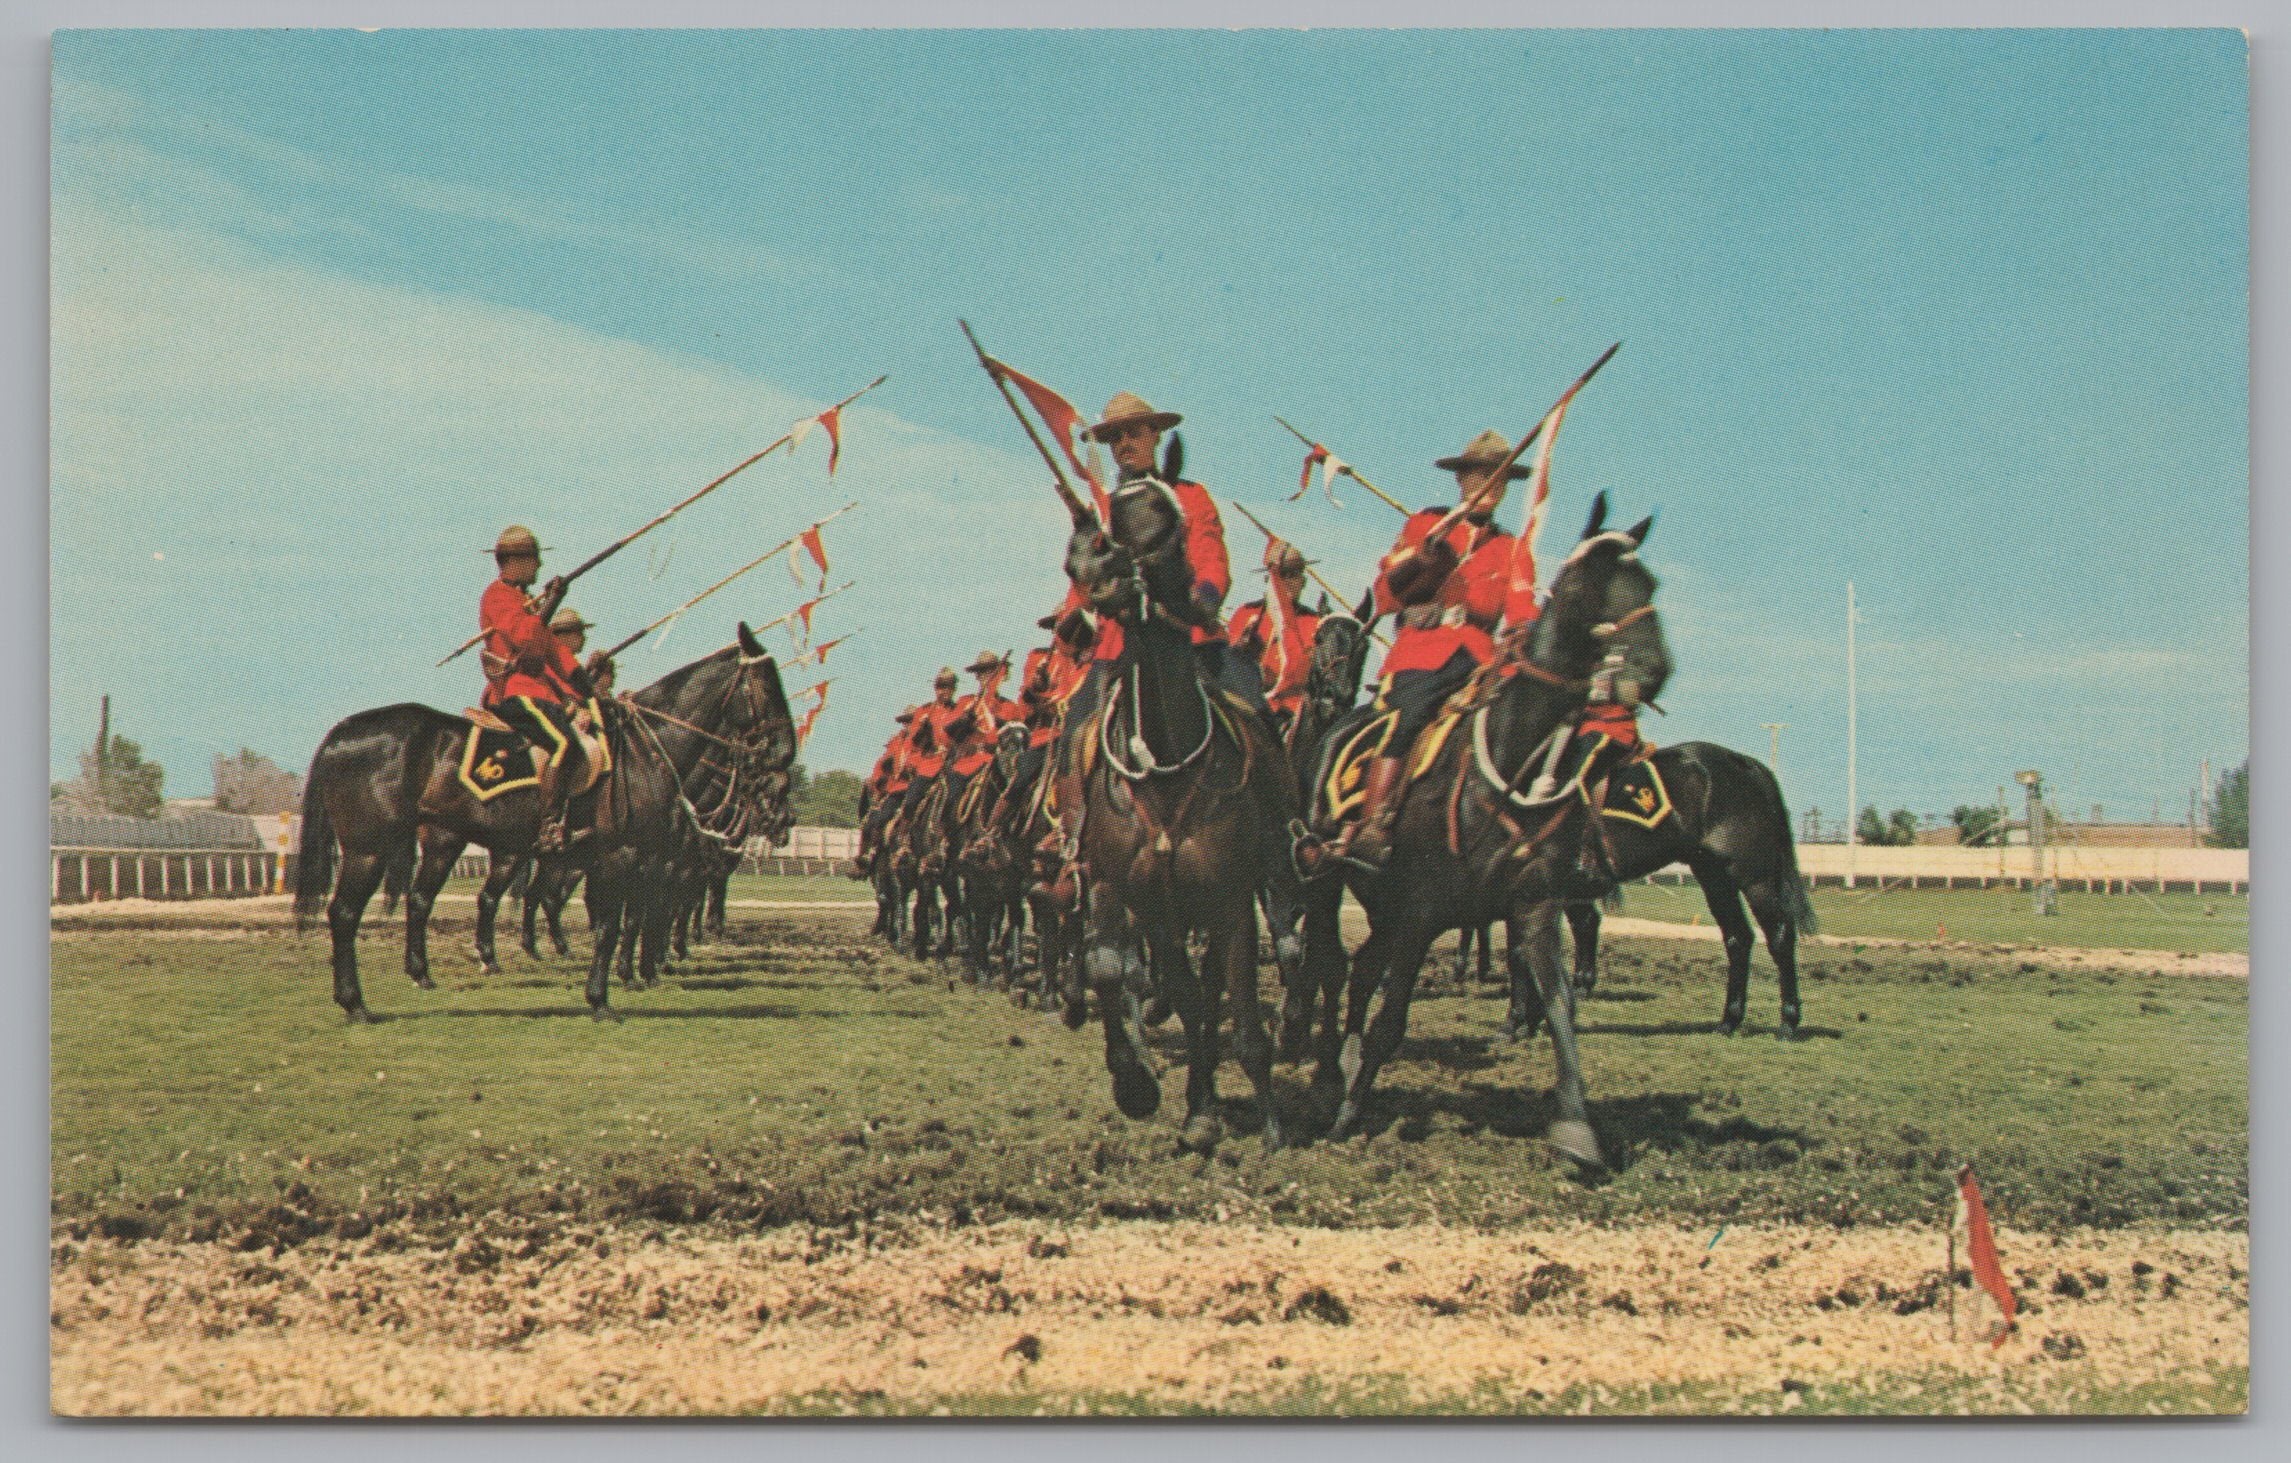 Royal Canadian Mounted Police Musical Ride, Vintage Post Card.